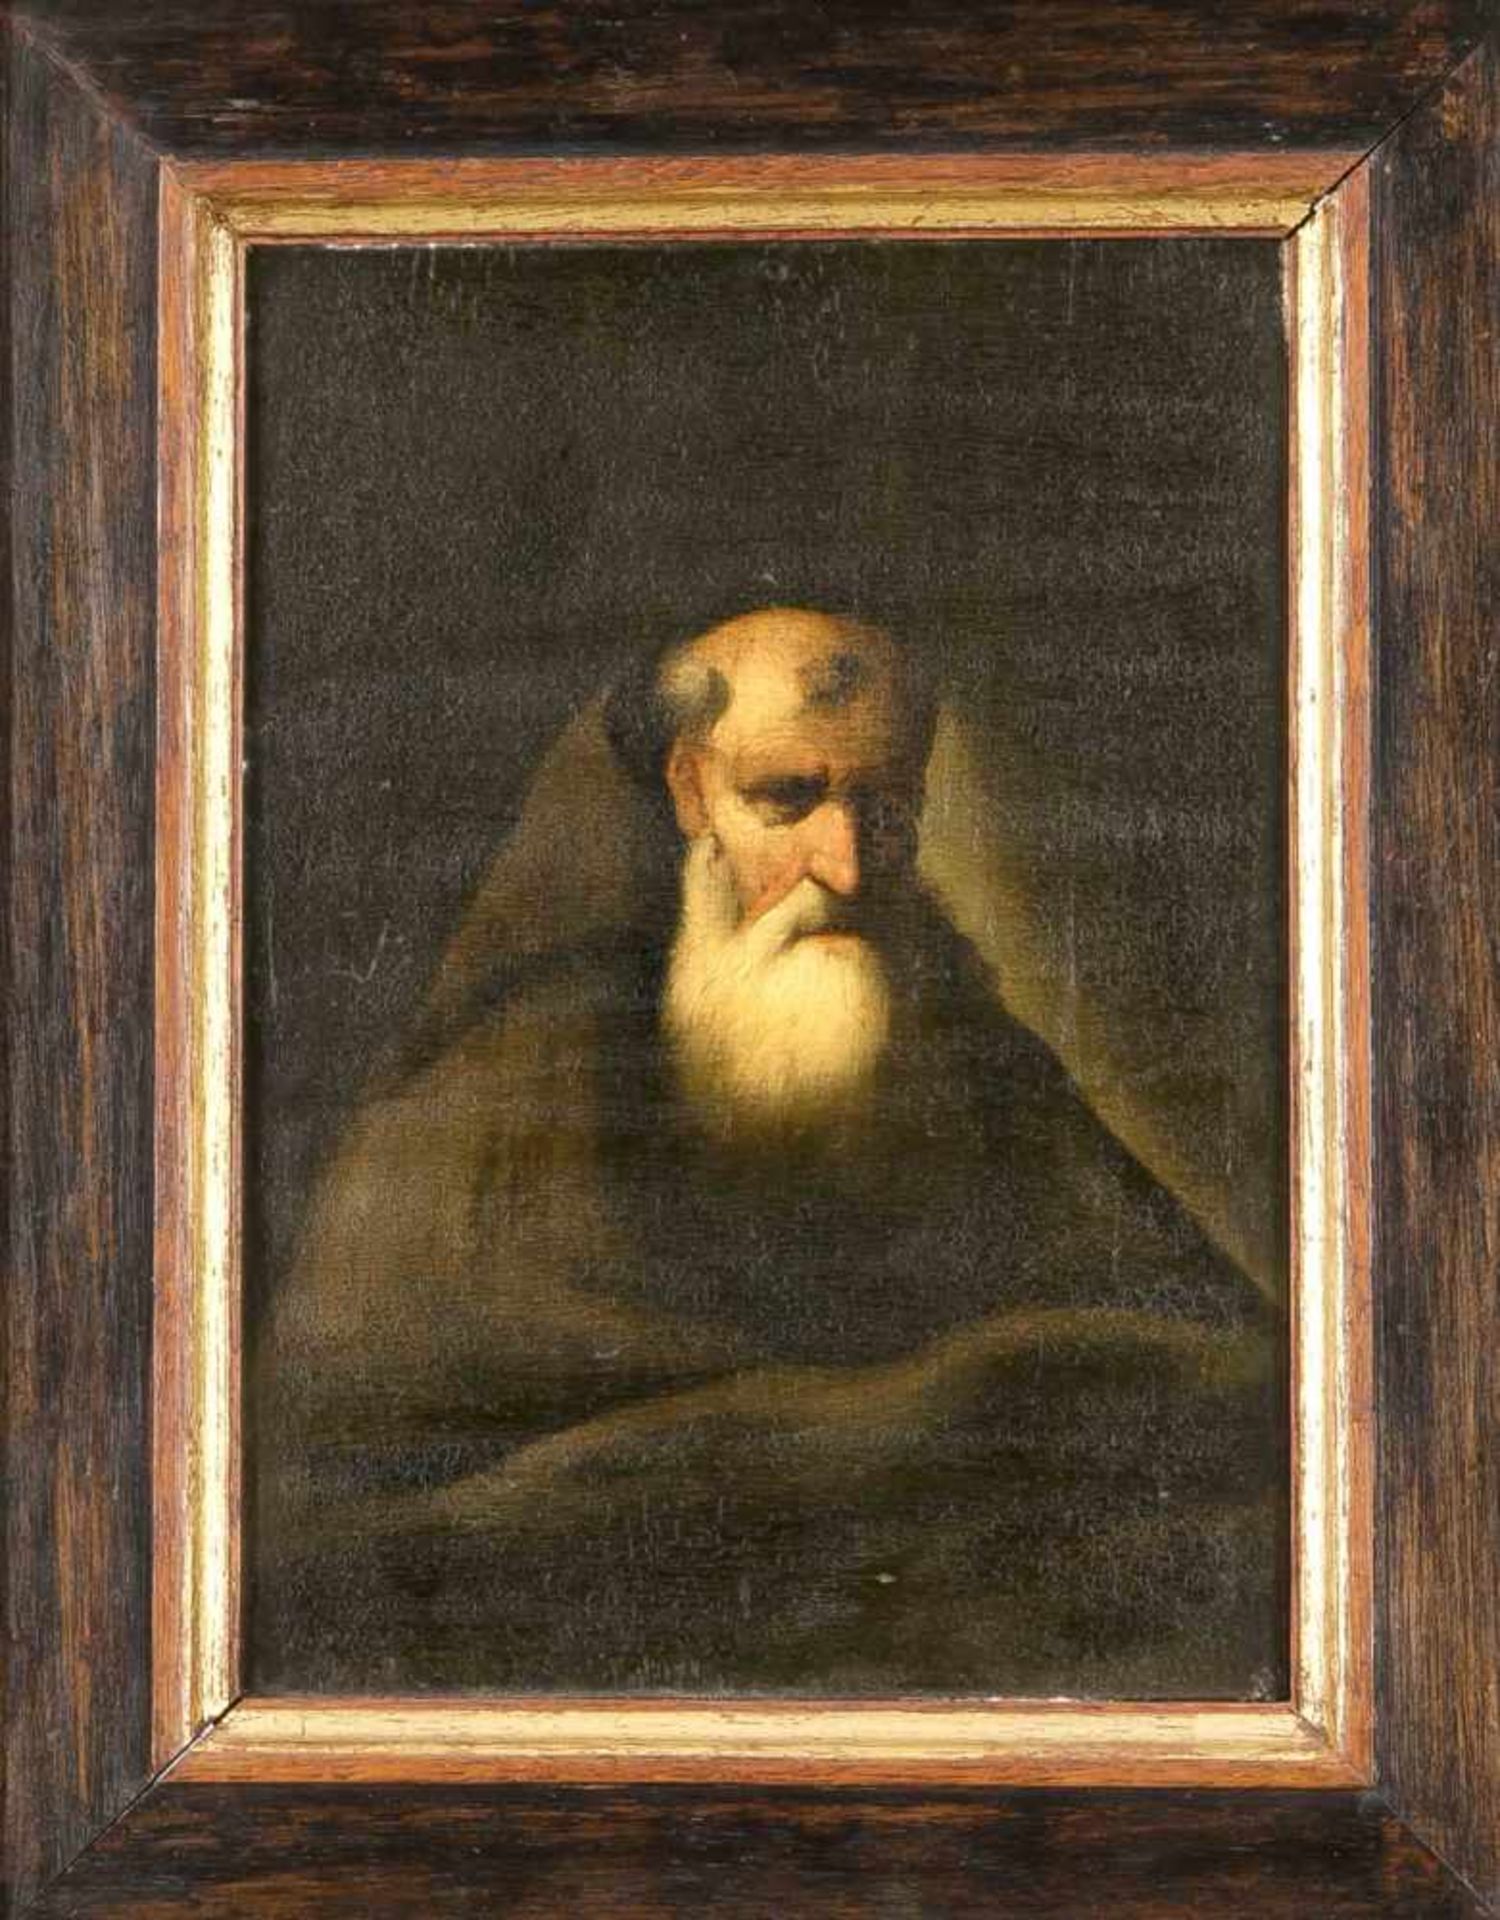 Unsigned. Around 1880. Portrait rabbi / monk. Oil paint on panel. Dimensions: 26 x 19 cm. In good